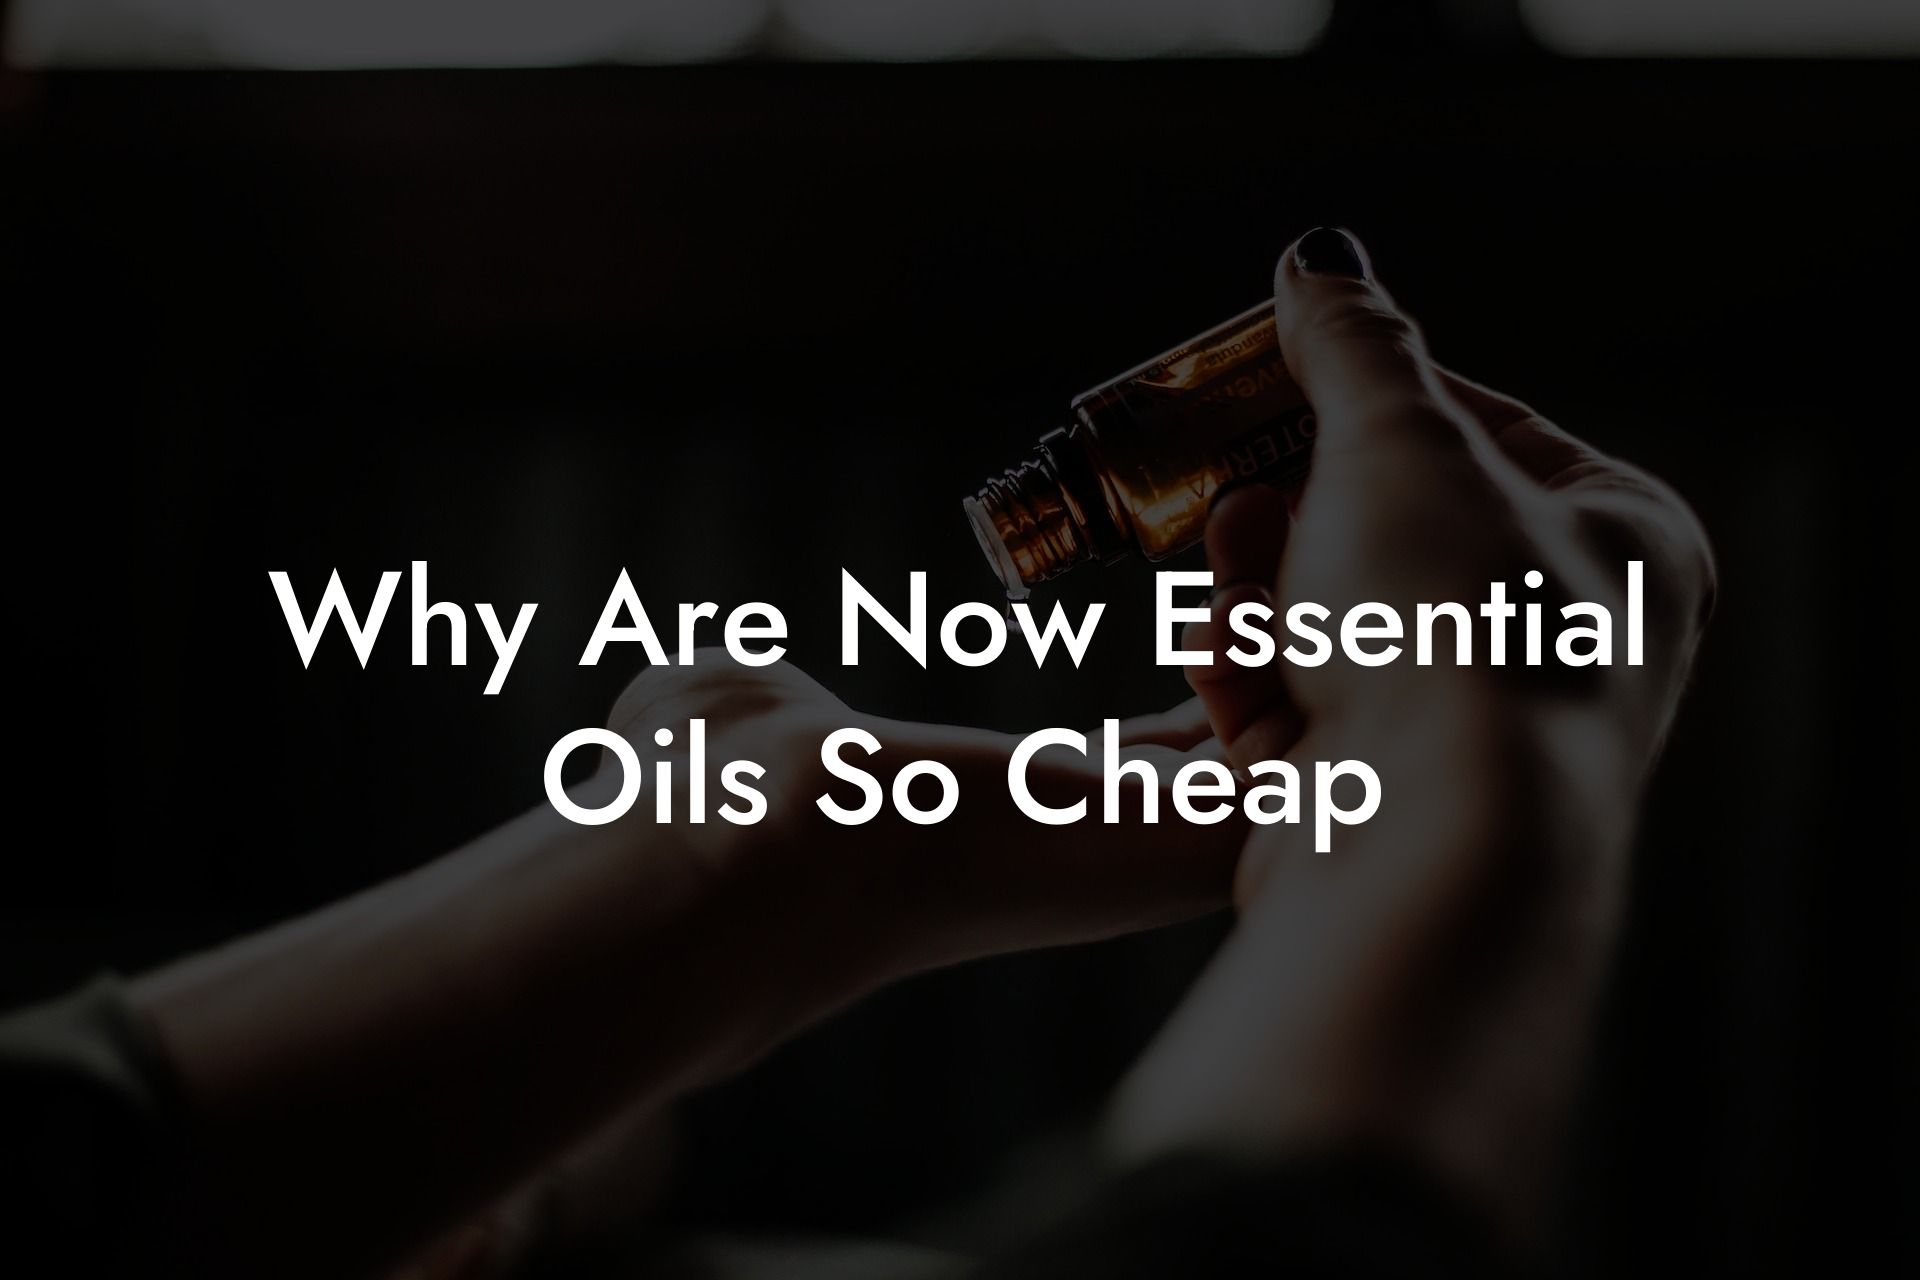 Why Are Now Essential Oils So Cheap